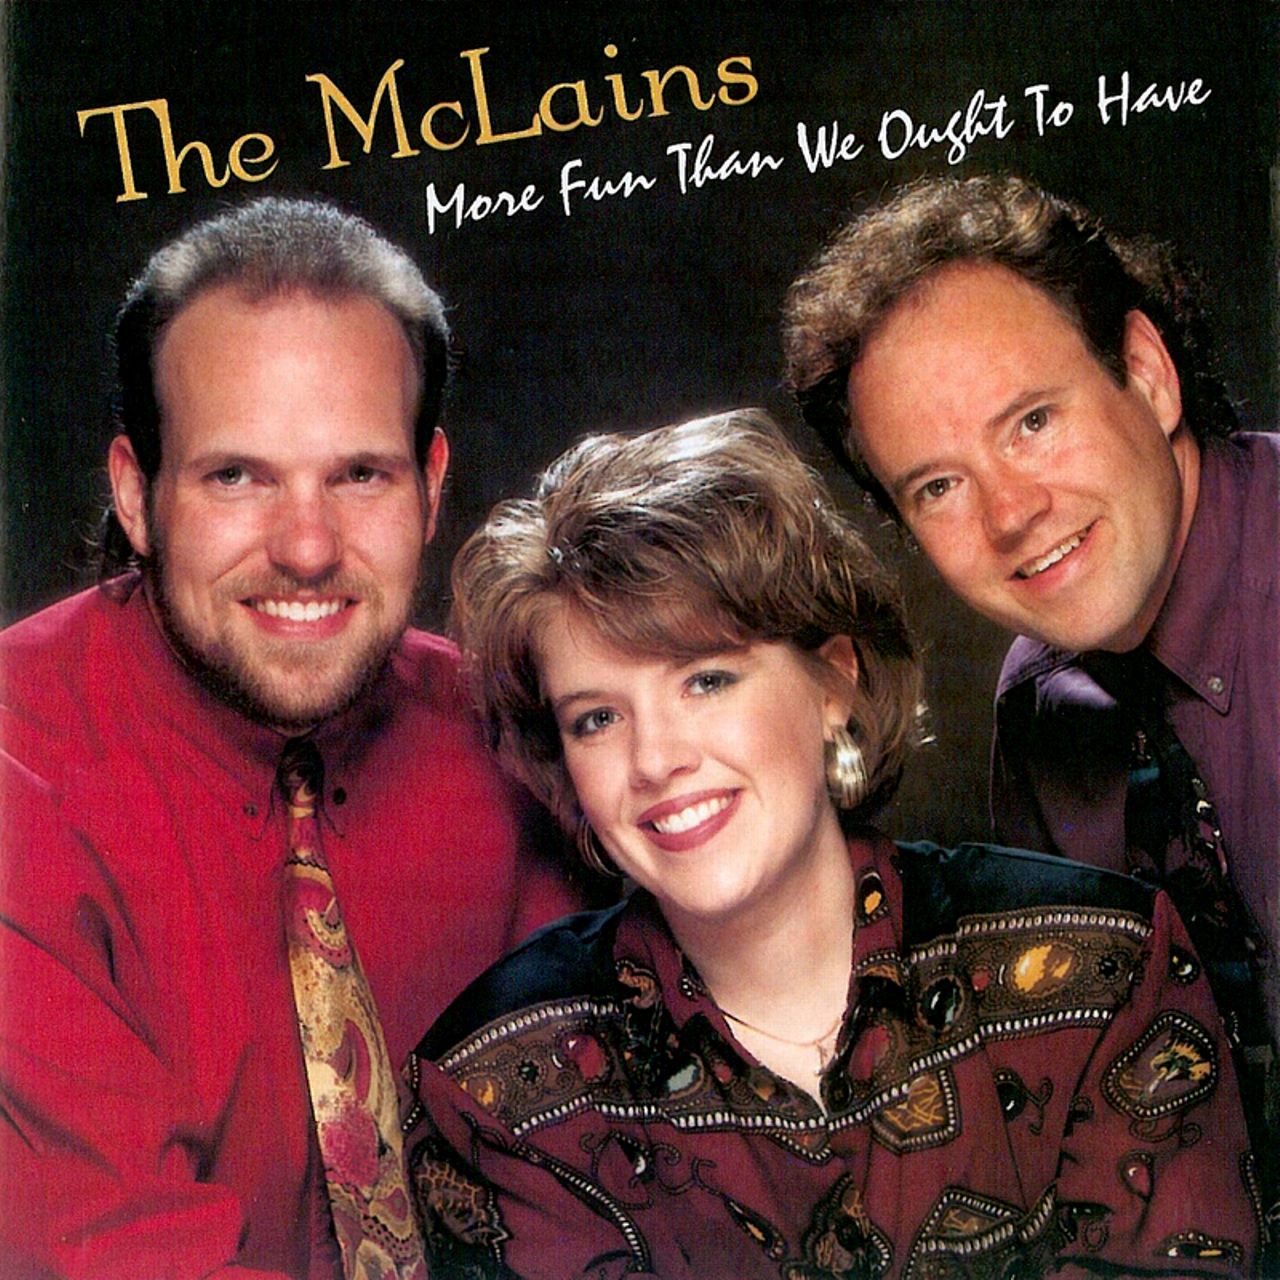 McLains - More Fun Than We Ought To Have cover album